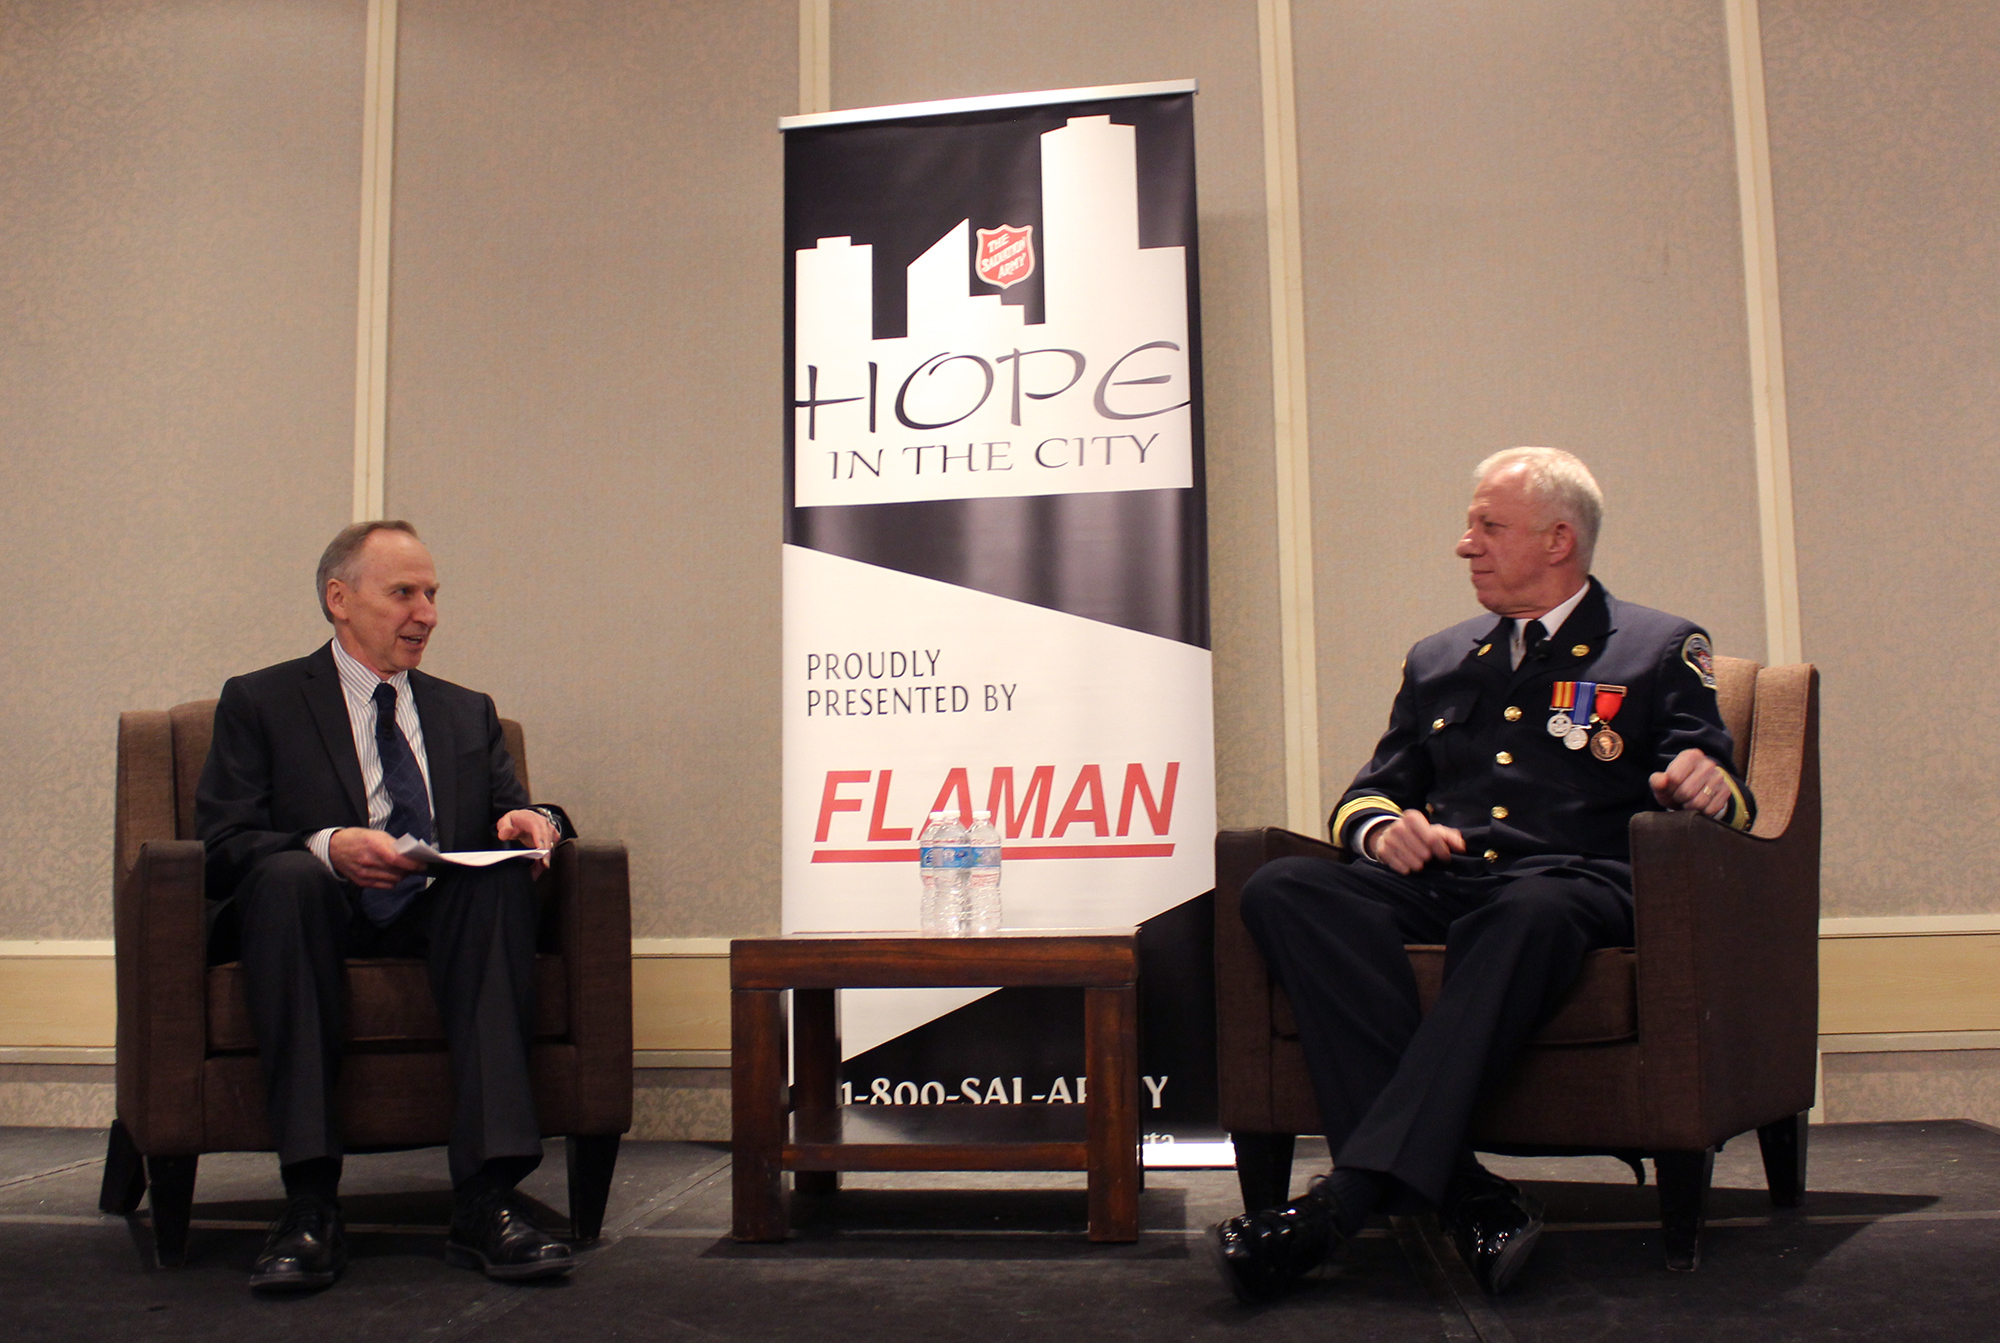 Fort McMurray Fire Chief Darby Allen was the guest speaker at the Edmonton Hope in the City lunch on November 25.